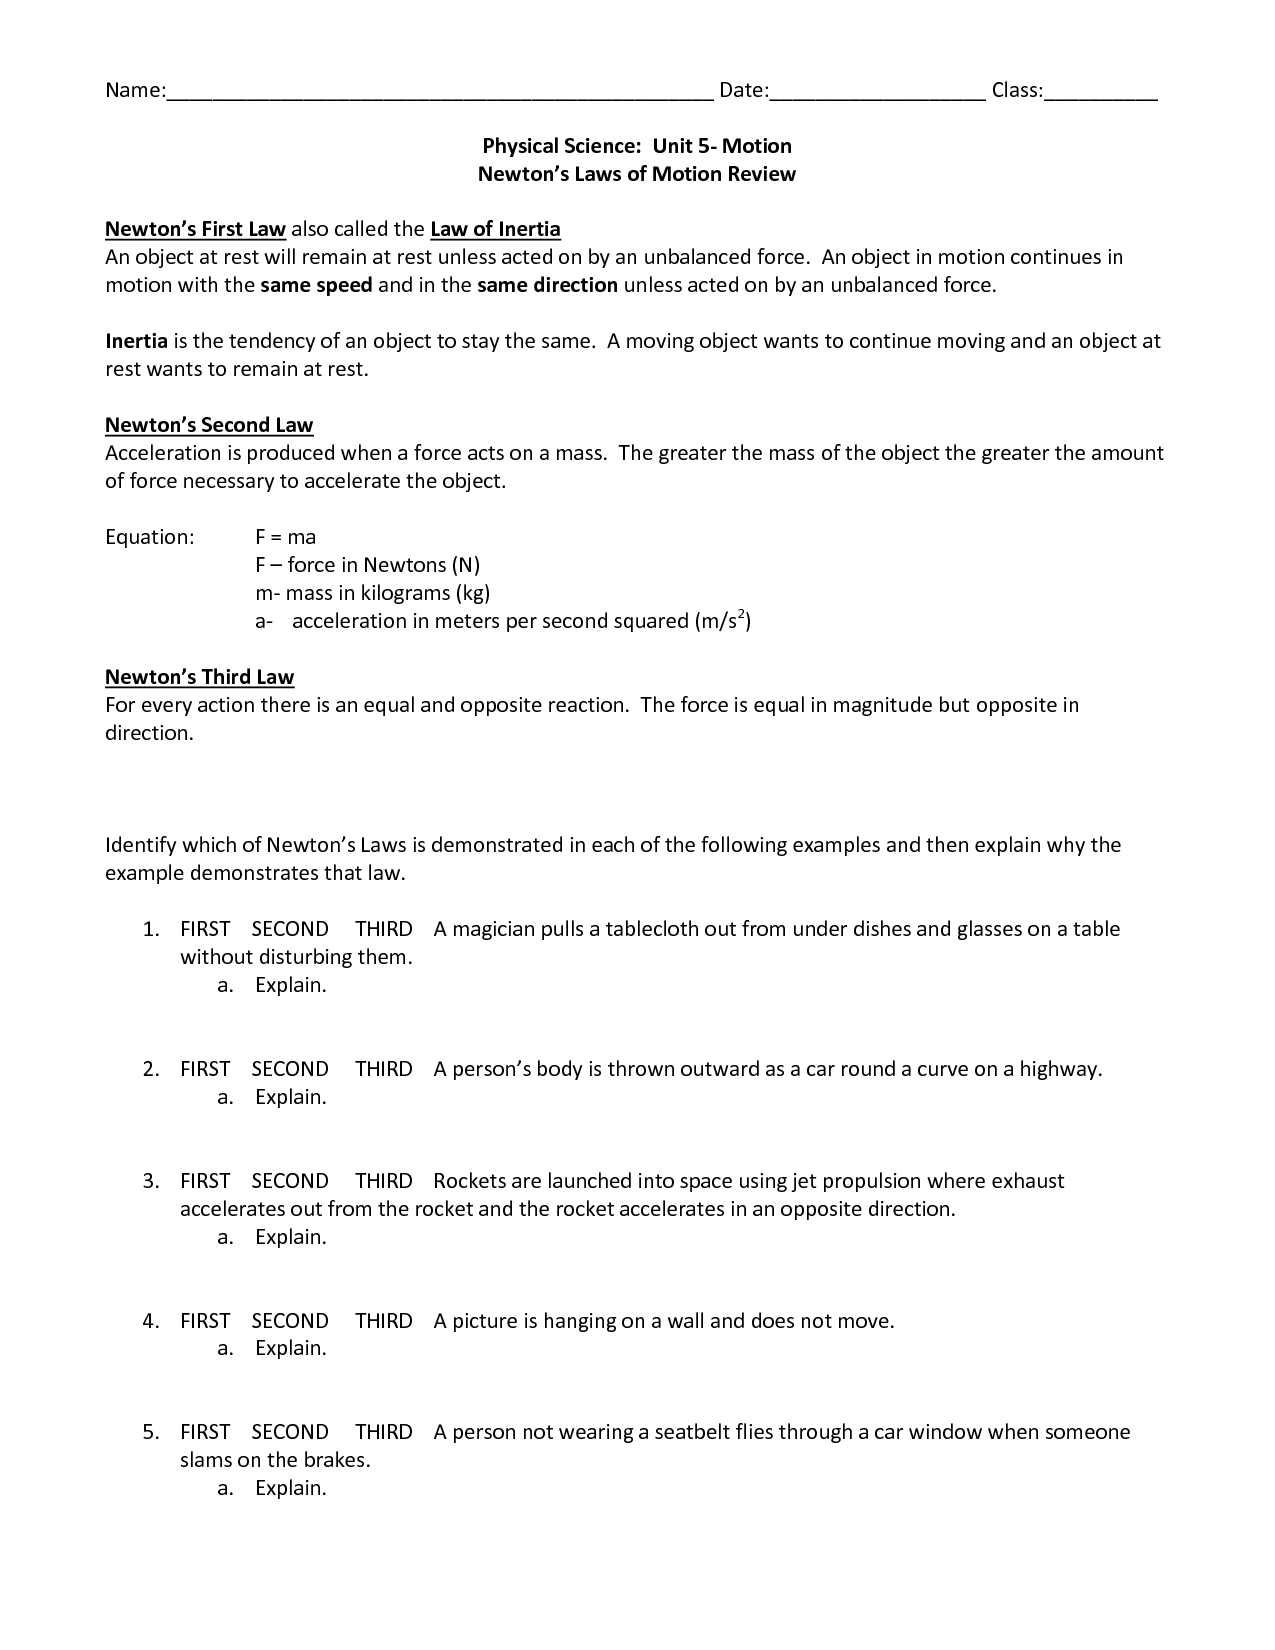 Newtons Laws Of Motion Worksheet Answers - Nidecmege With Newton039s Second Law Worksheet